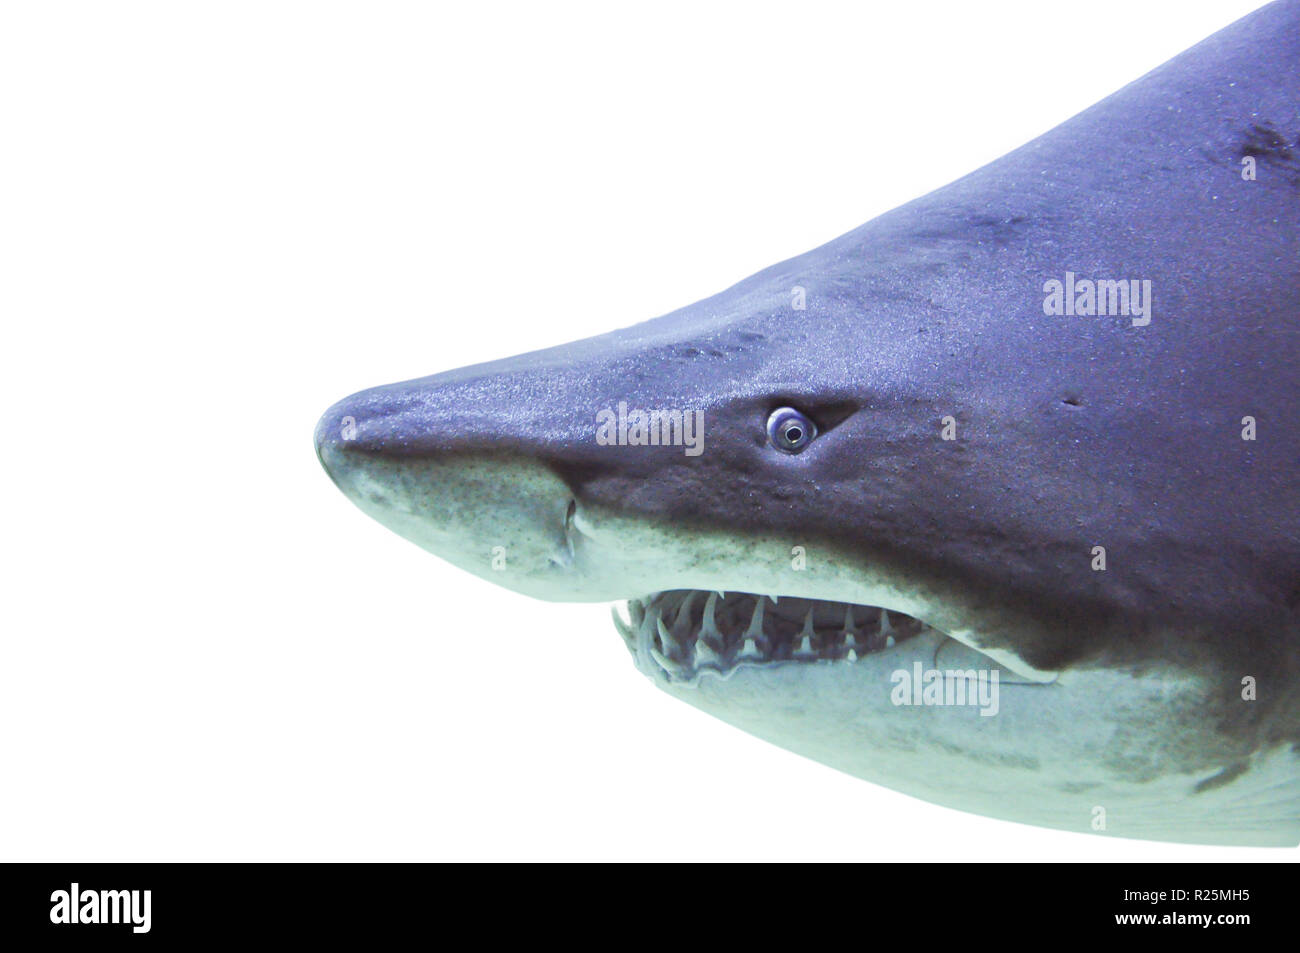 sand tiger shark underwater close up isolated on white background Stock Photo